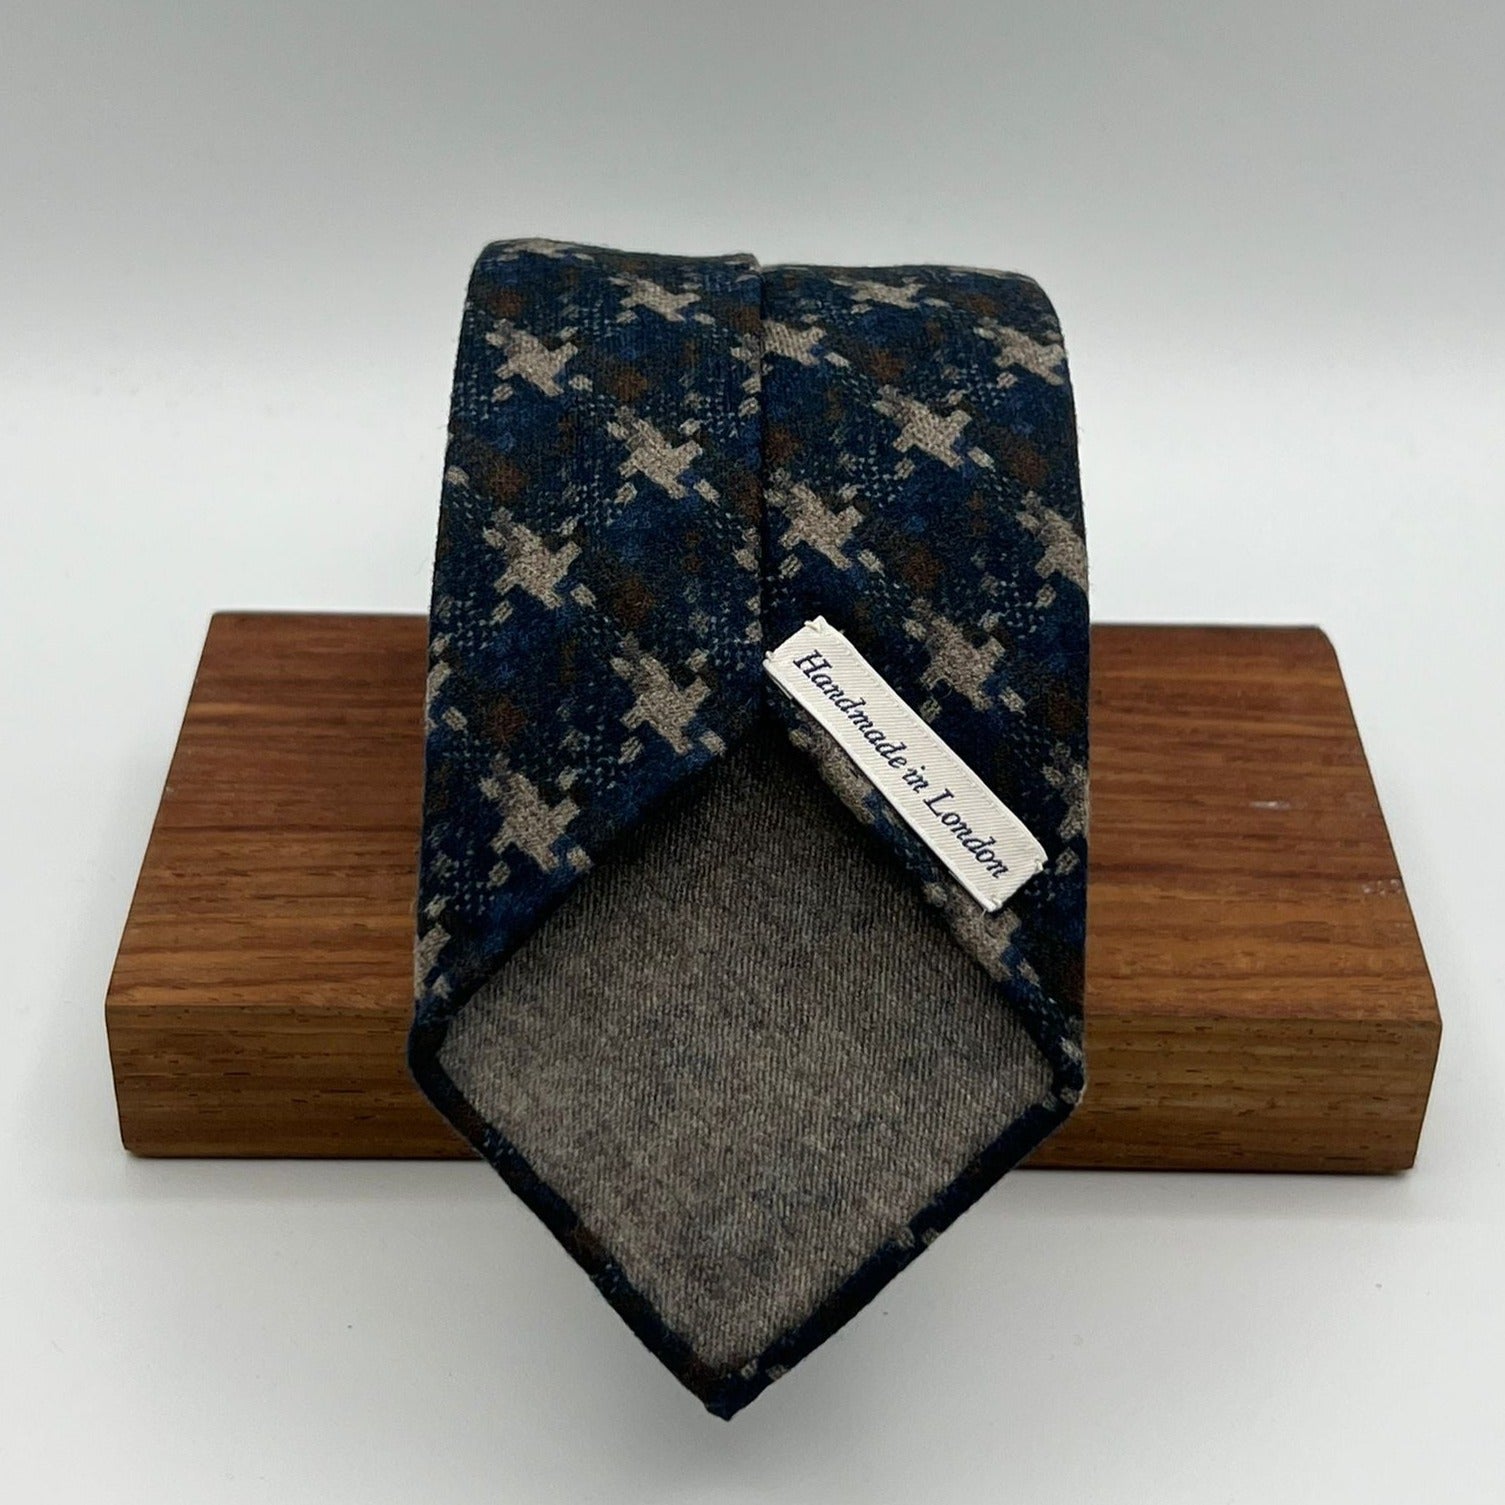 Drake's -  Wool - Blue, Light Grey and Brown Houndstooth Cheek Unlined Tie #6020